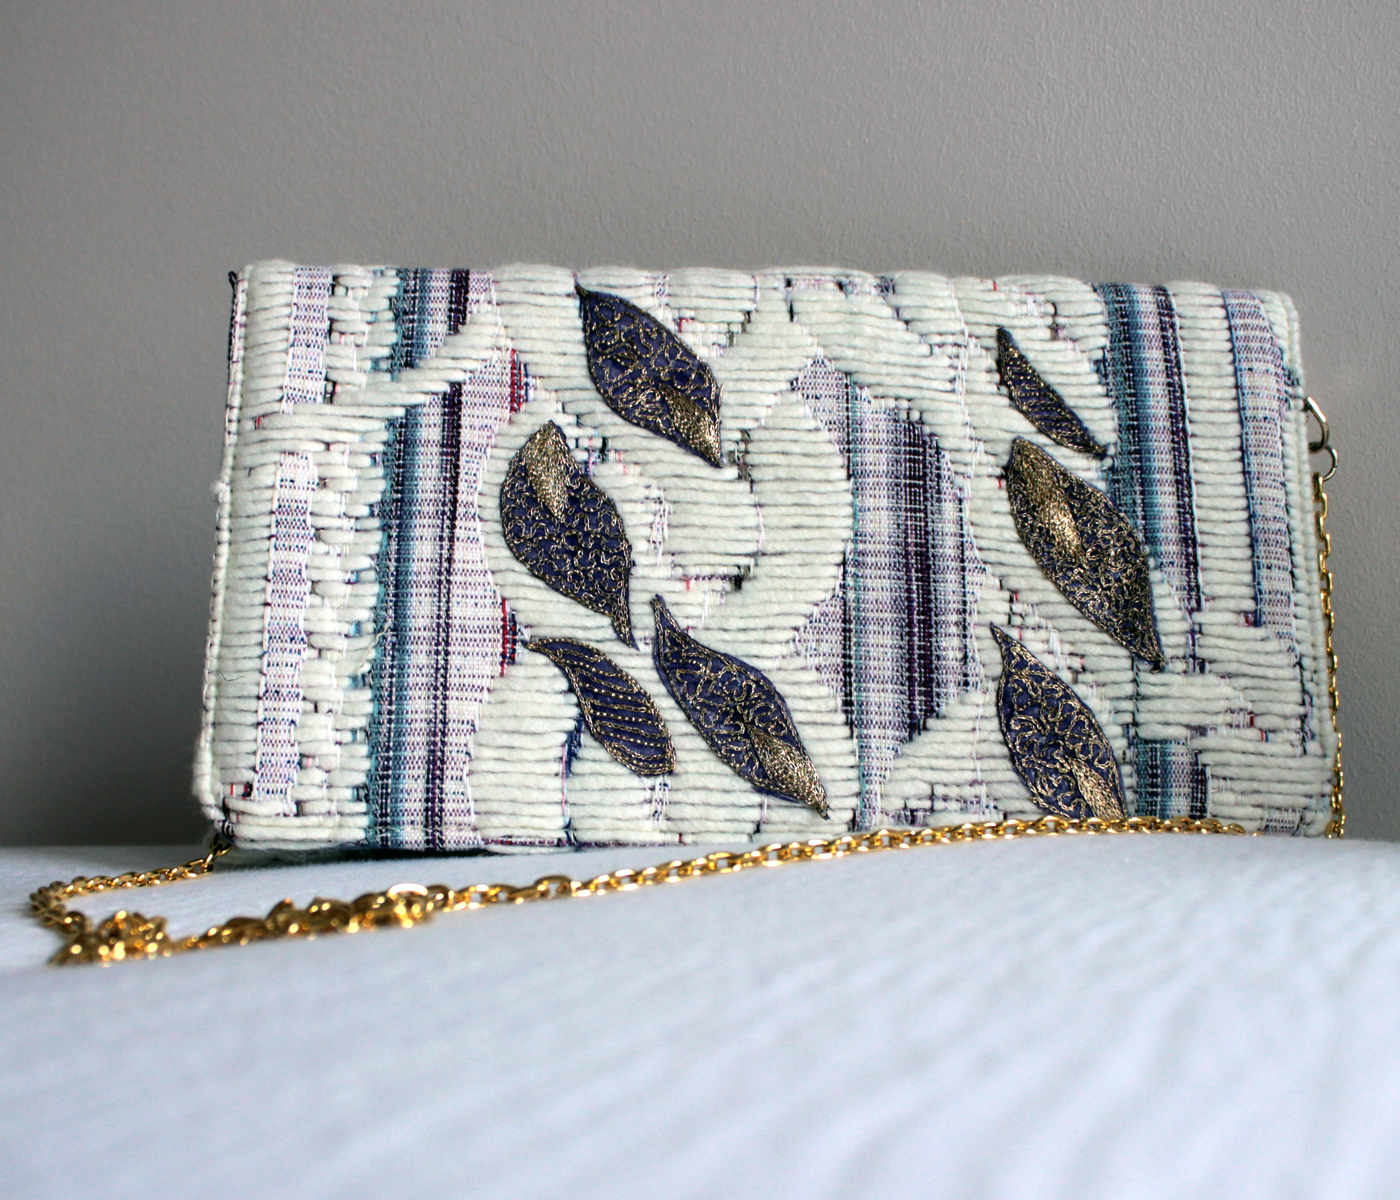 Embroidered Purple and Gold Handcrafted Clutch - Ethical and Elegant